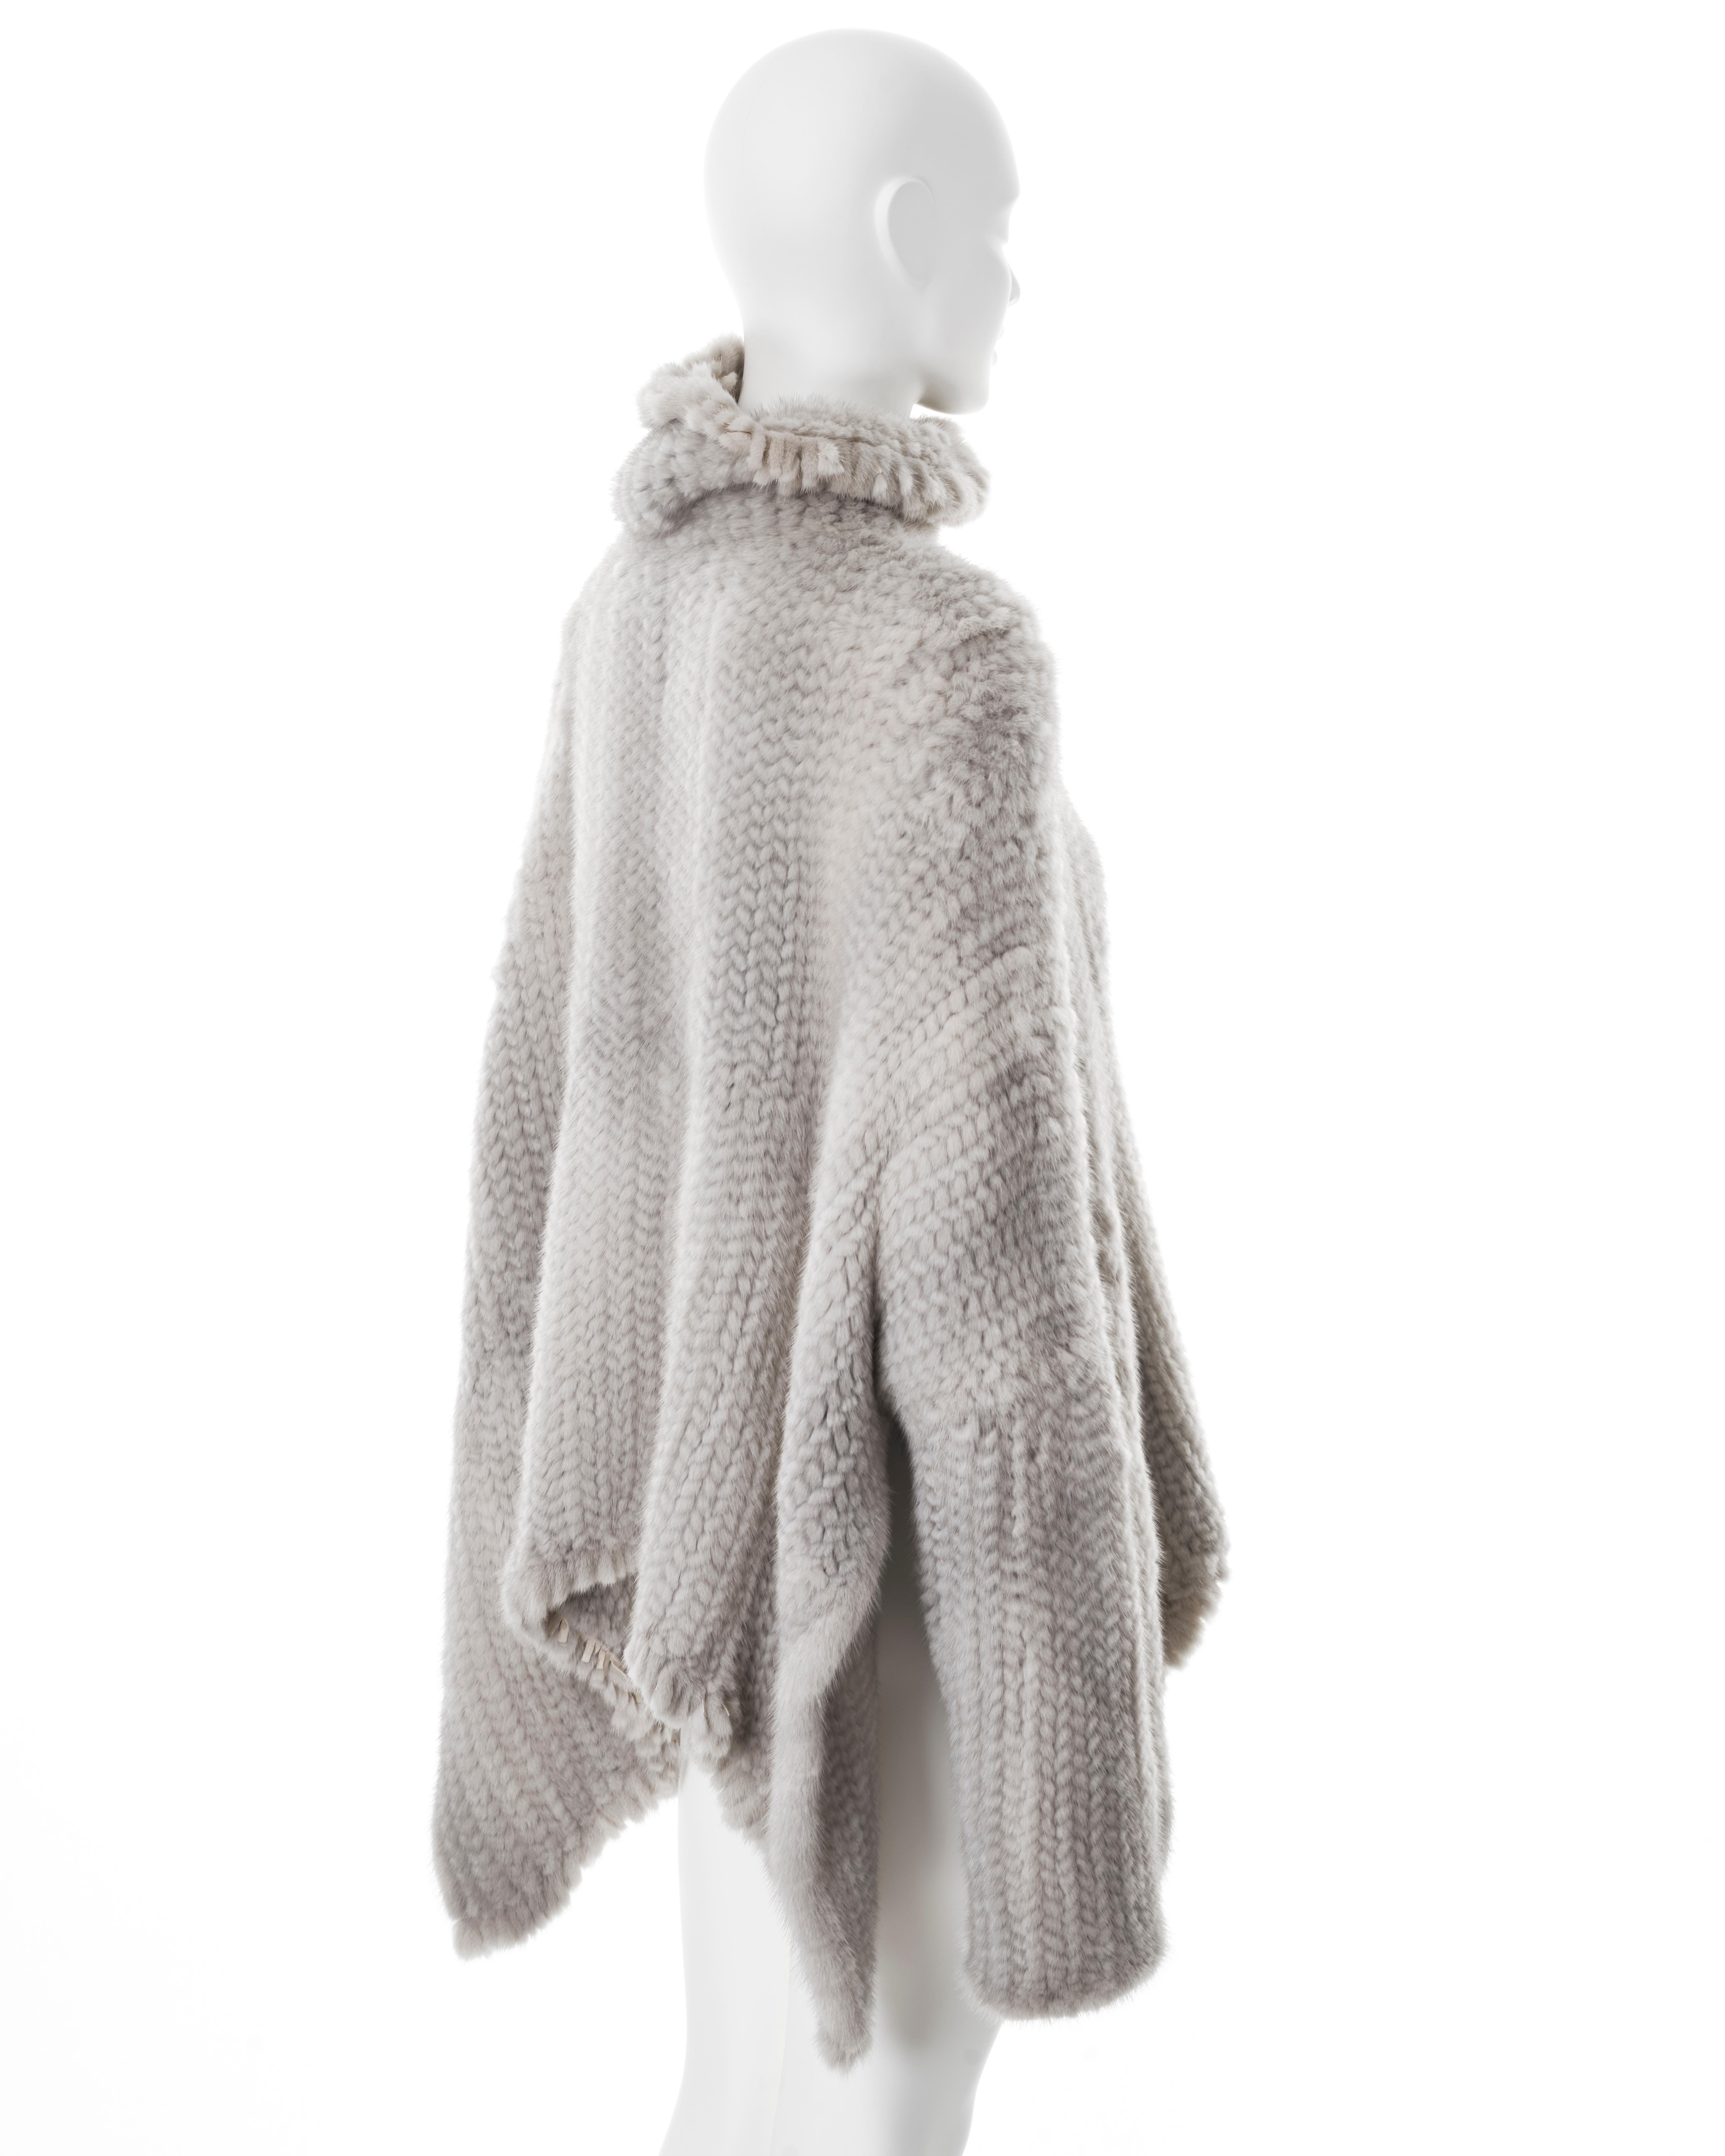 Christian Dior by John Galliano light grey knitted mink fur sweater, fw 2000 2